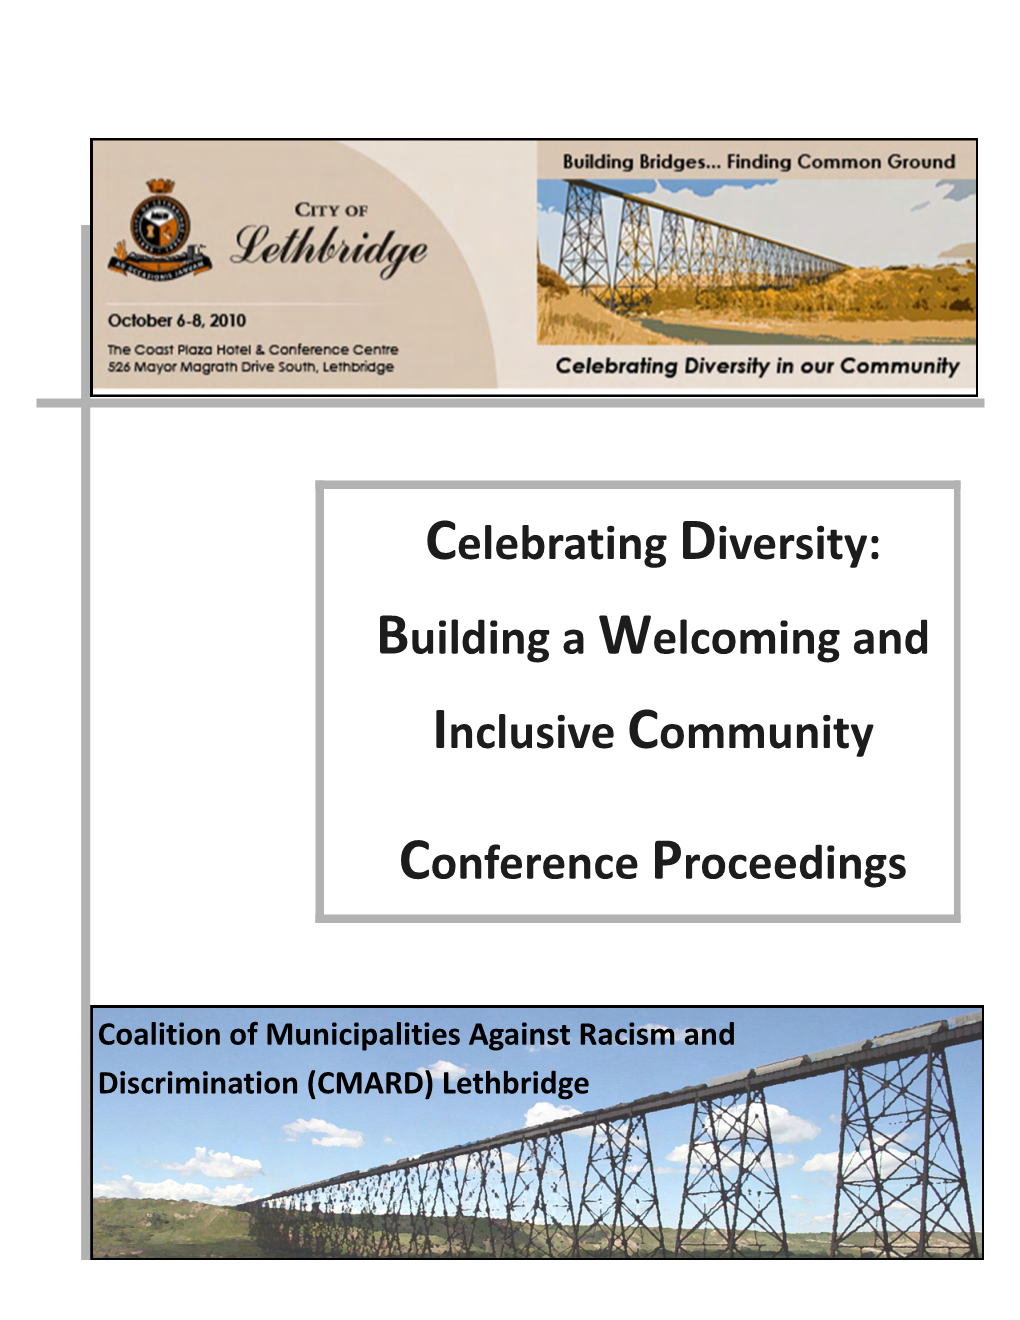 Celebrating Diversity Conference – Building a 2010 Welcoming and Inclusive Community